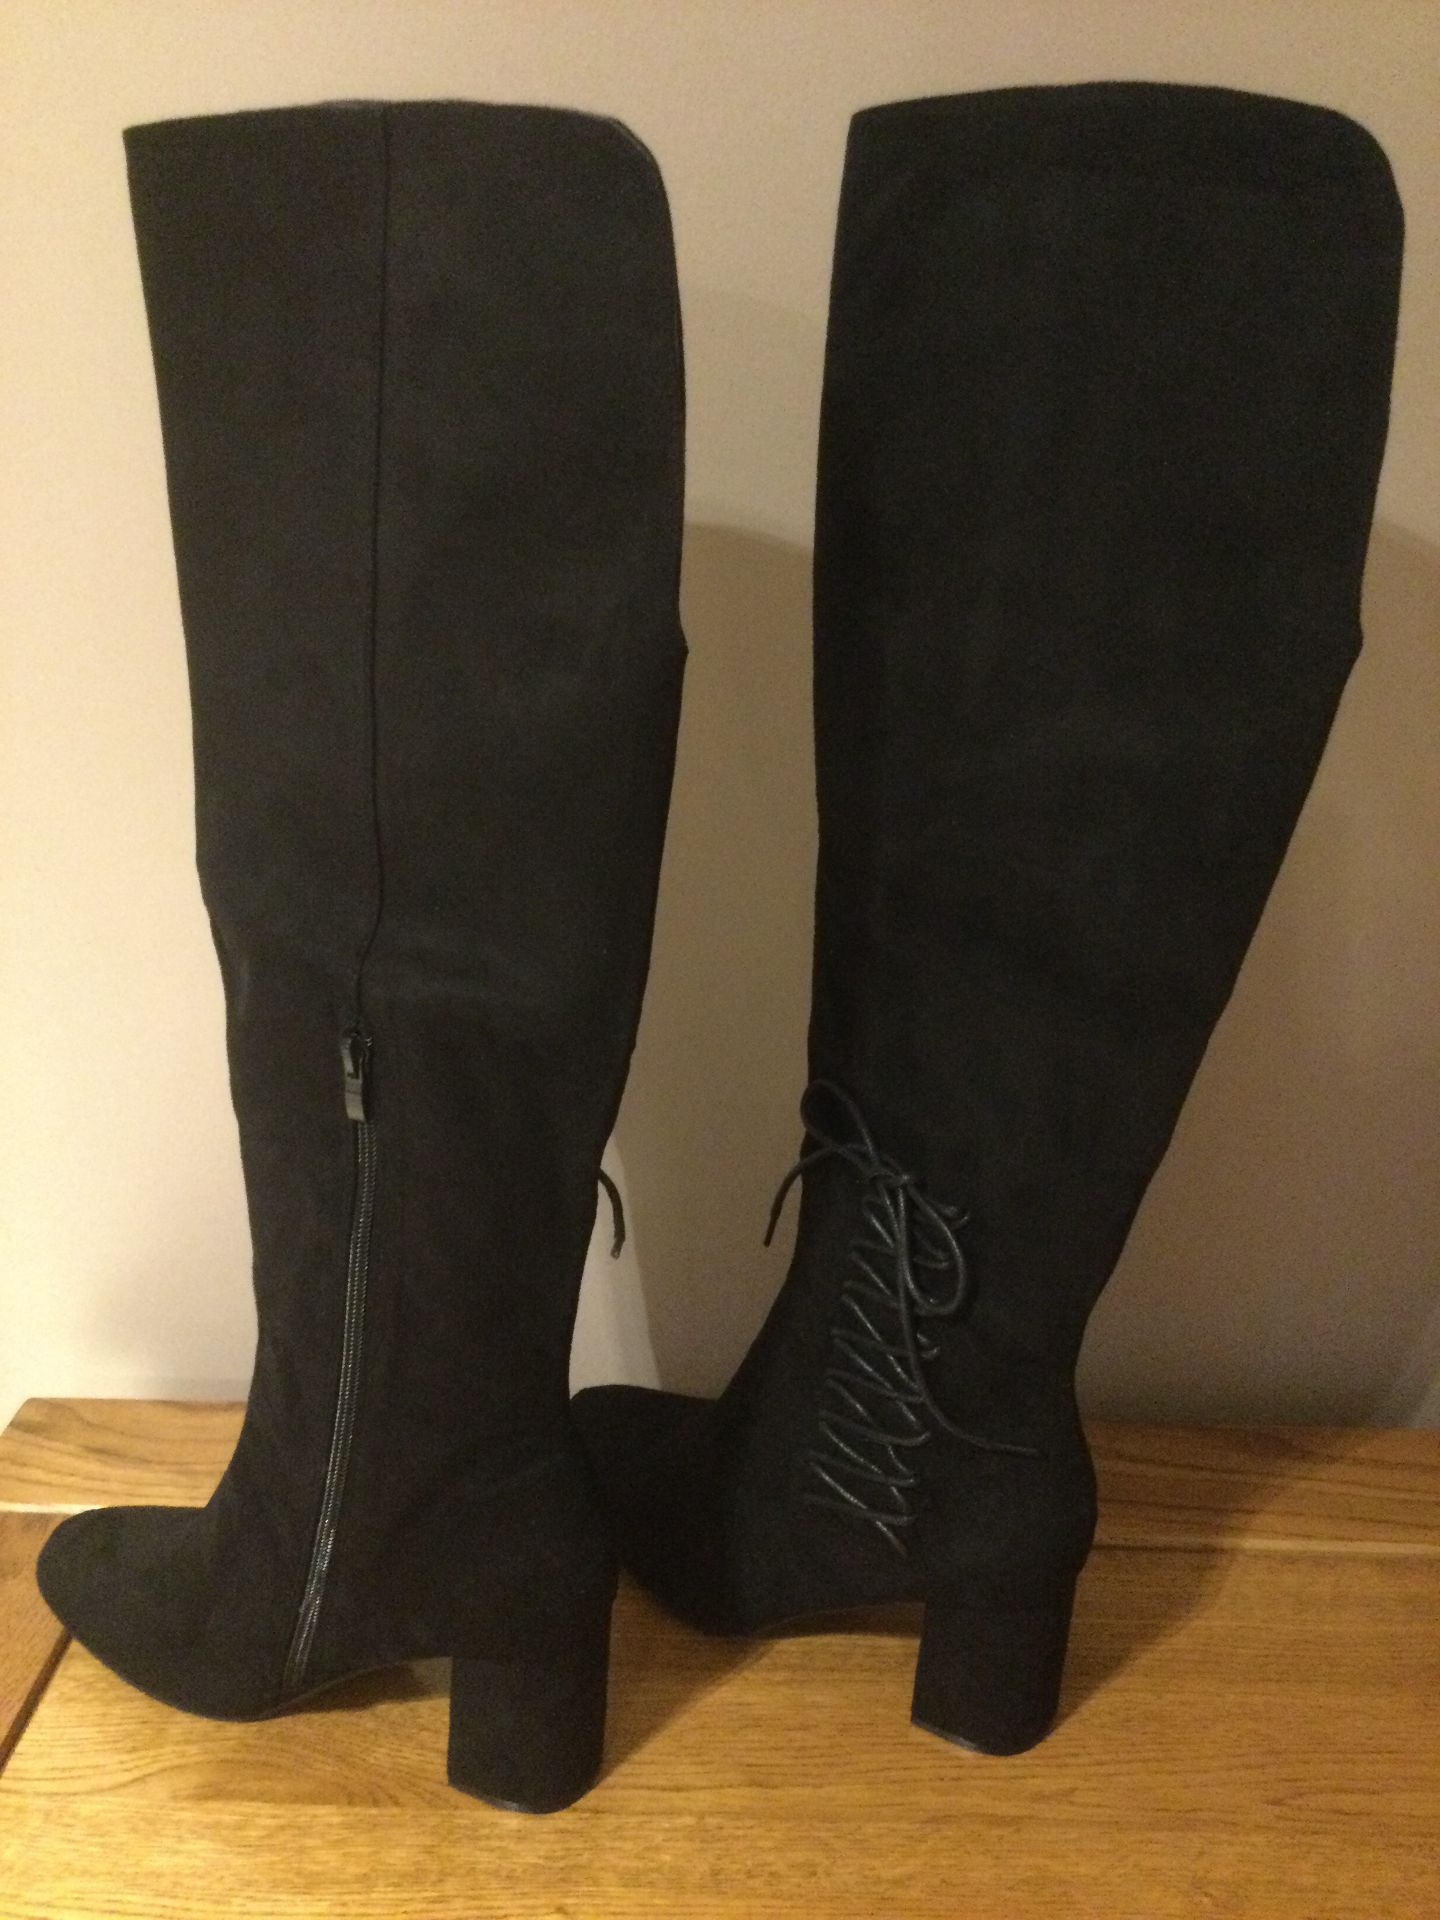 Dolcis “Emma” Long Boots, Block Heel, Size 3, Black - New RRP £55.00 - Image 2 of 7